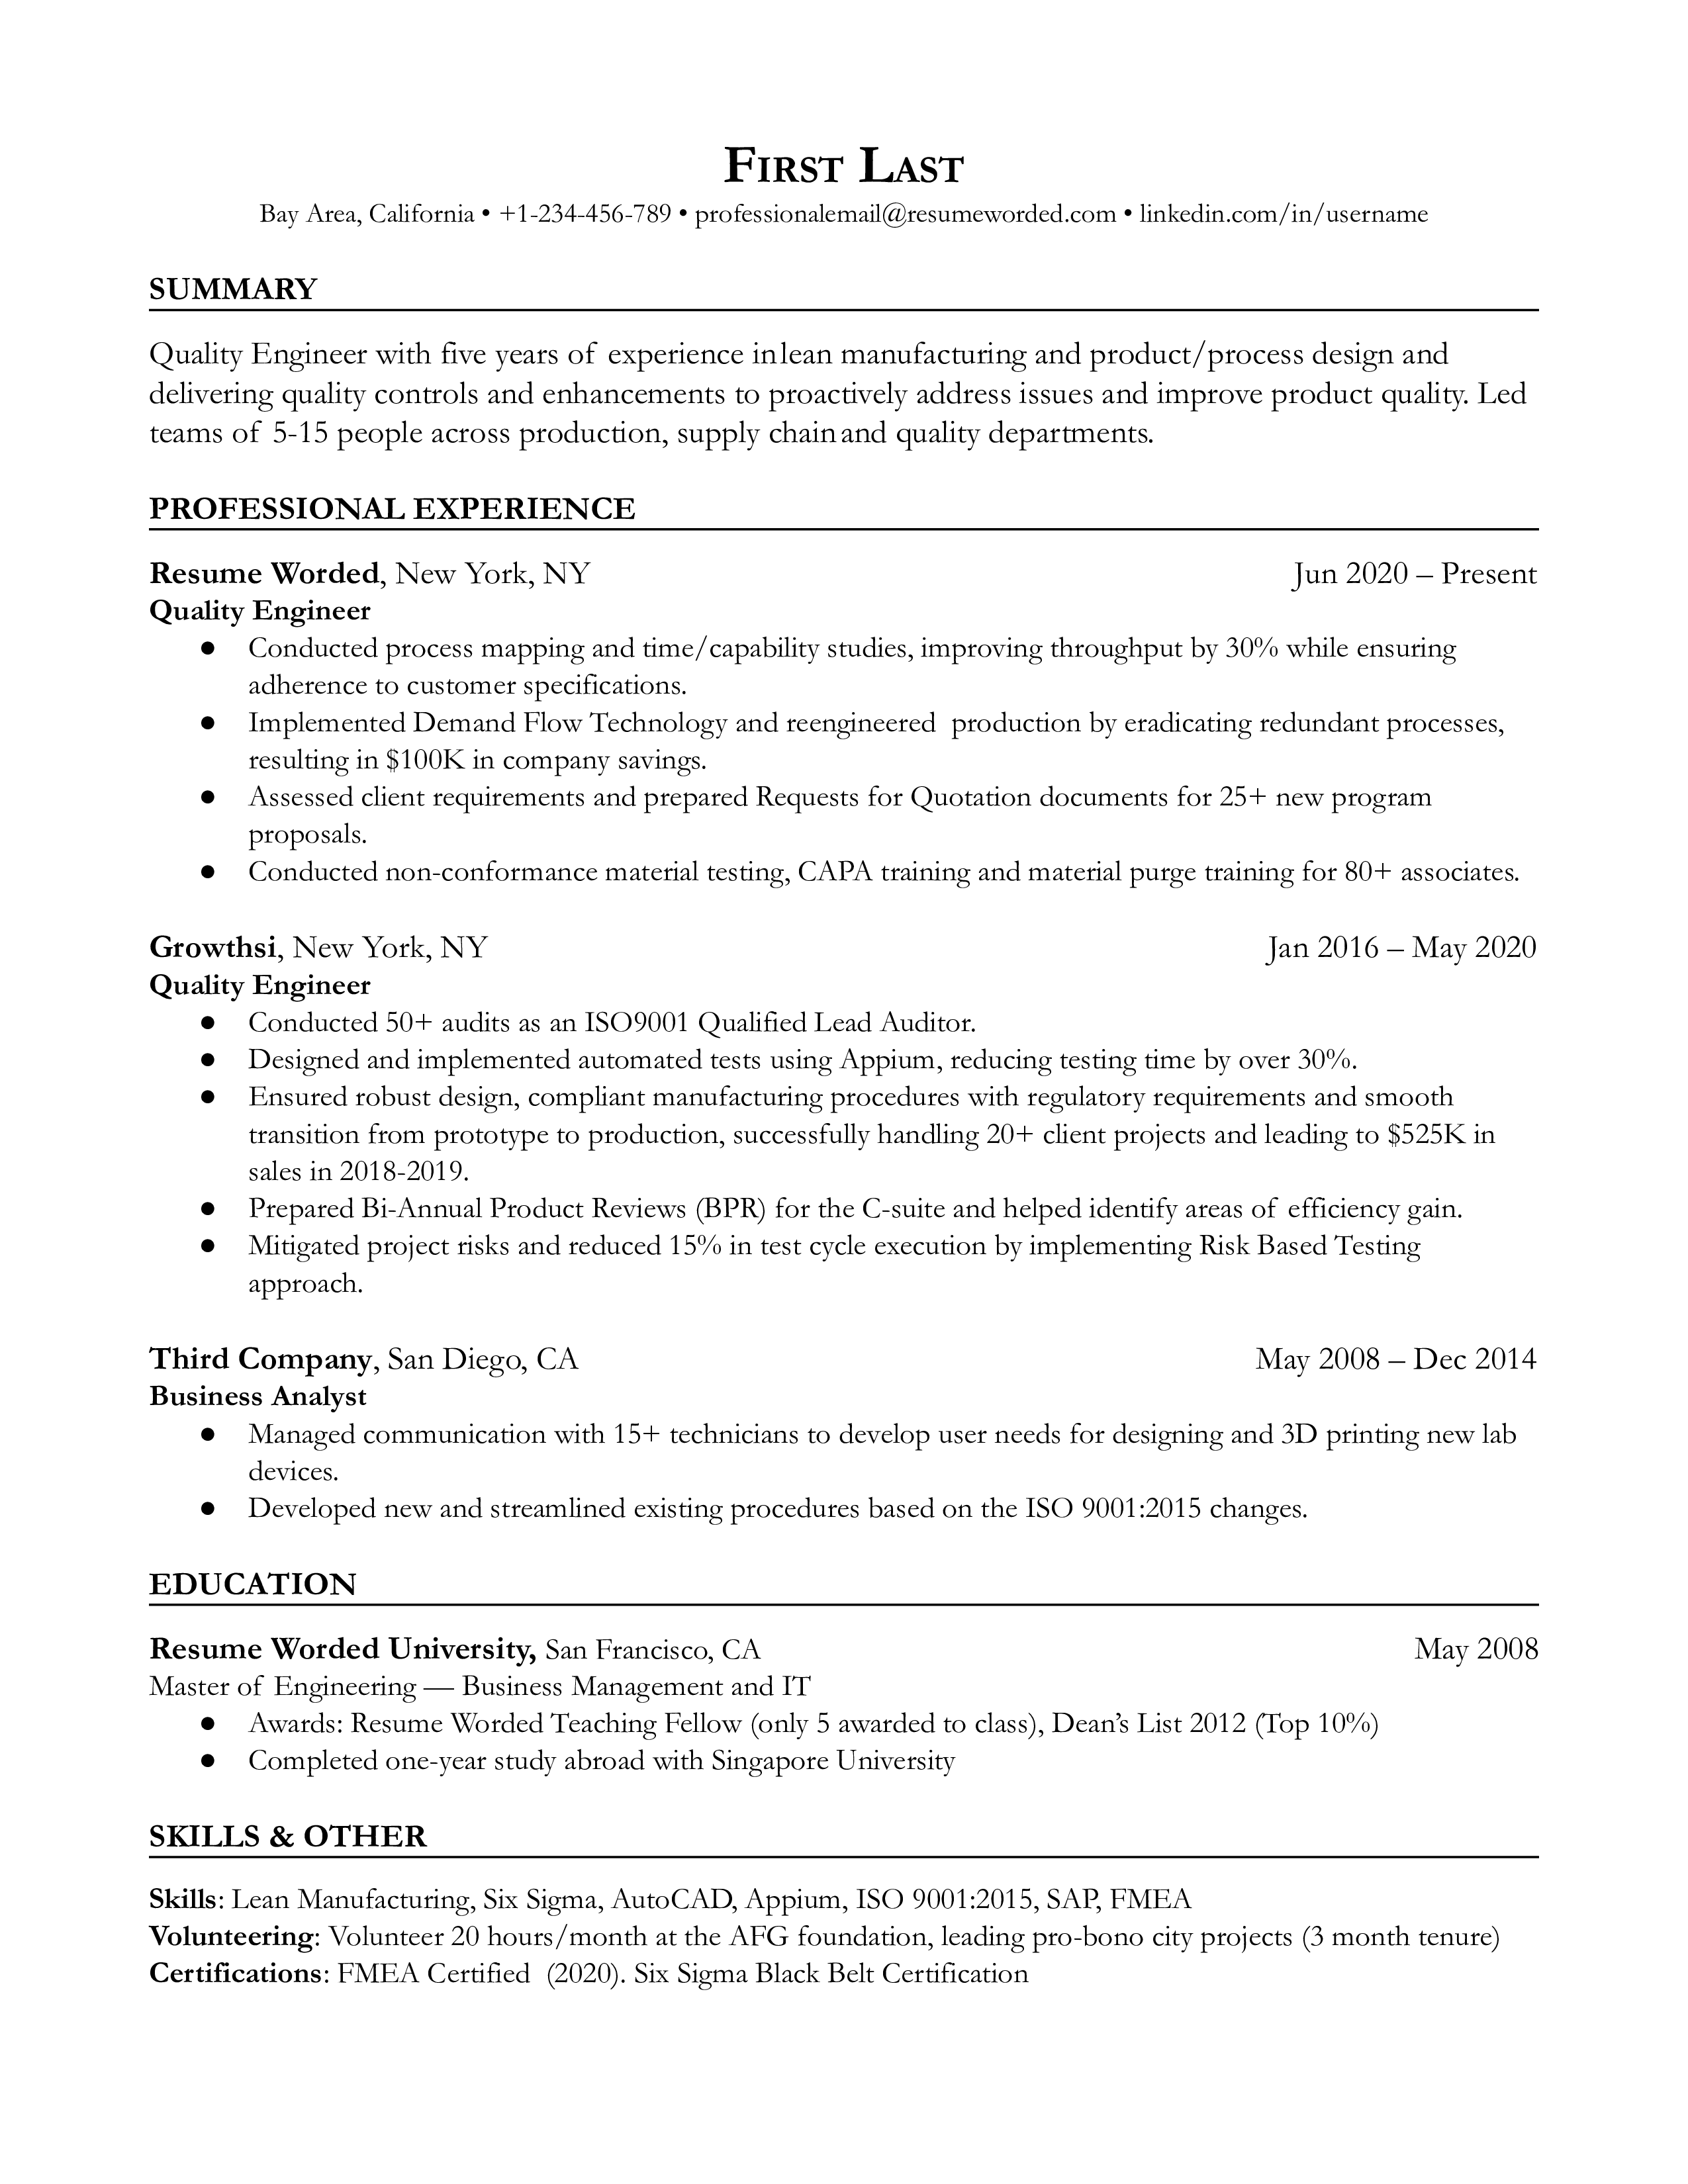 Quality Engineer resume example in 2023 and tips and trends for job hunters